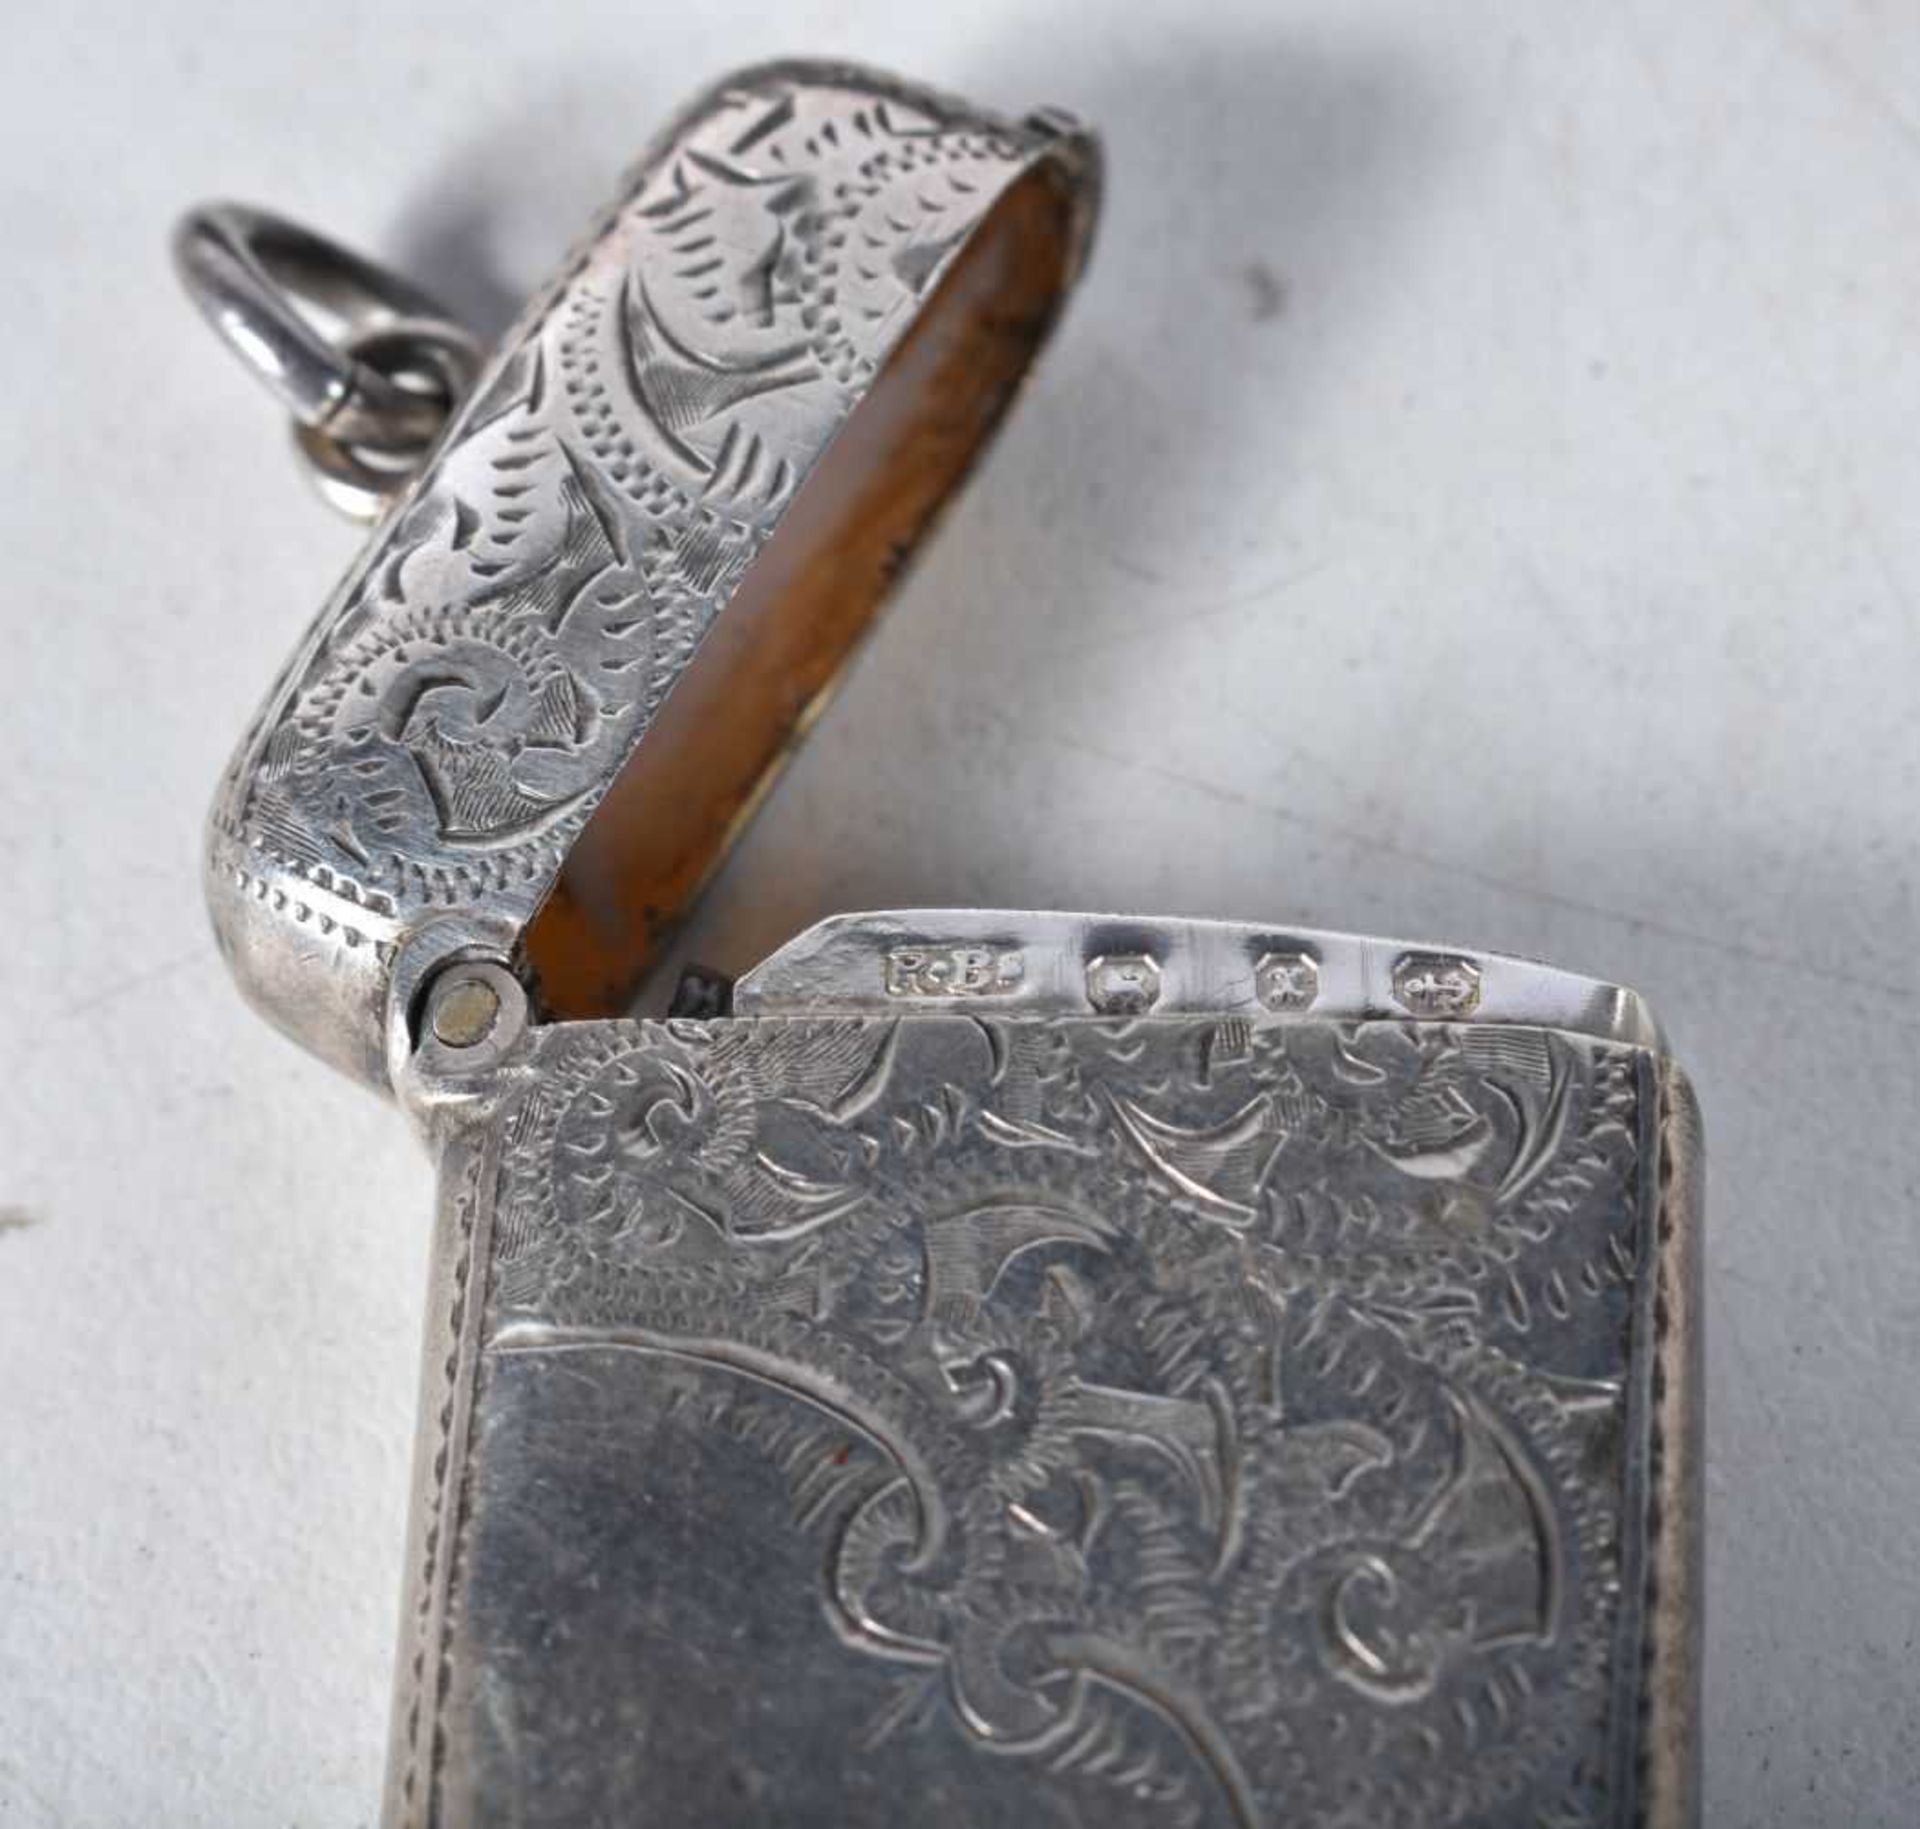 Tobacciana silver items including - A Cased Meerschaum Pipe with Silver Mounts and Amber Stem, A - Image 5 of 5